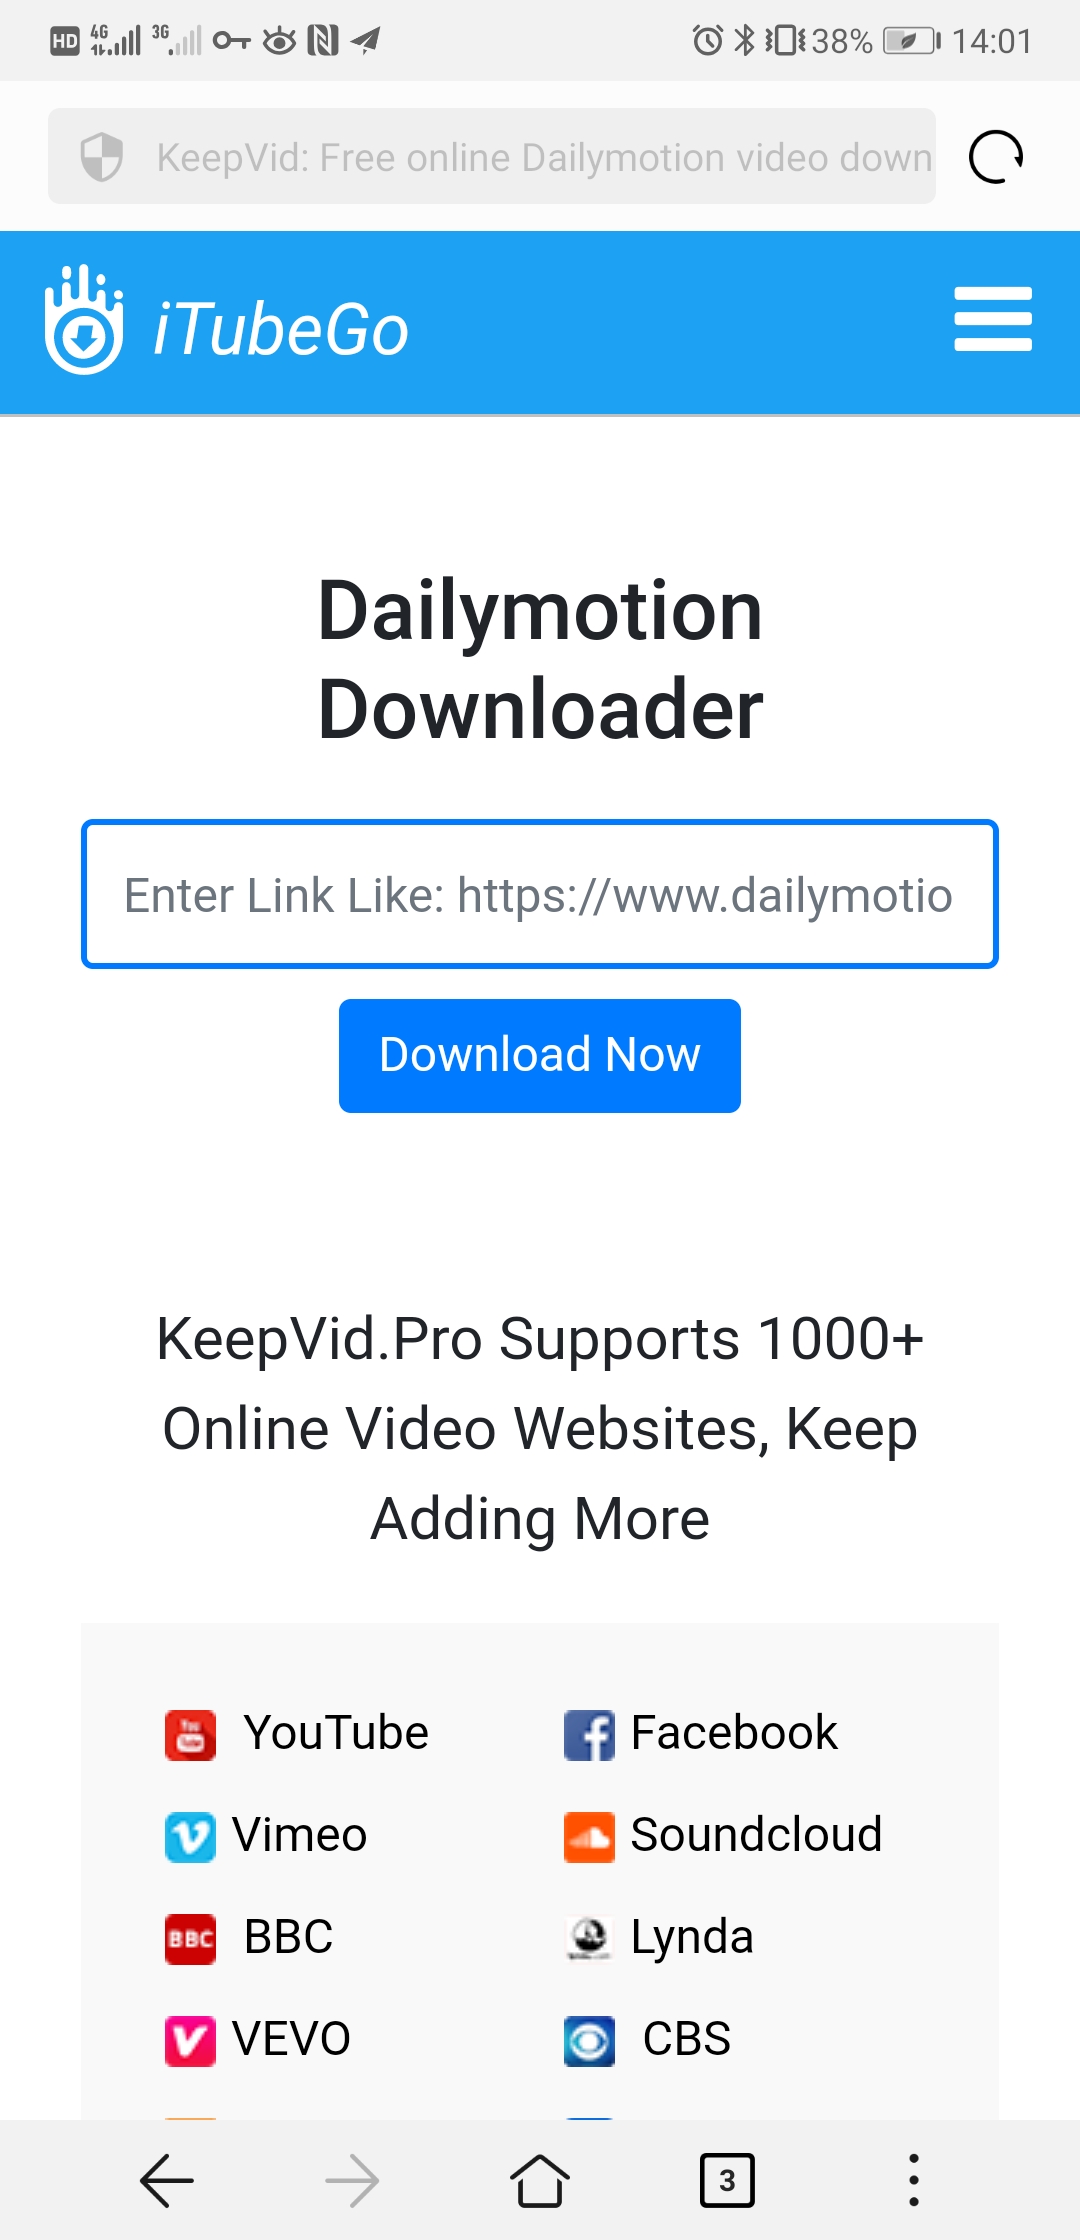 How To Download Videos From Dailymotion For Free On Android - frenzynew